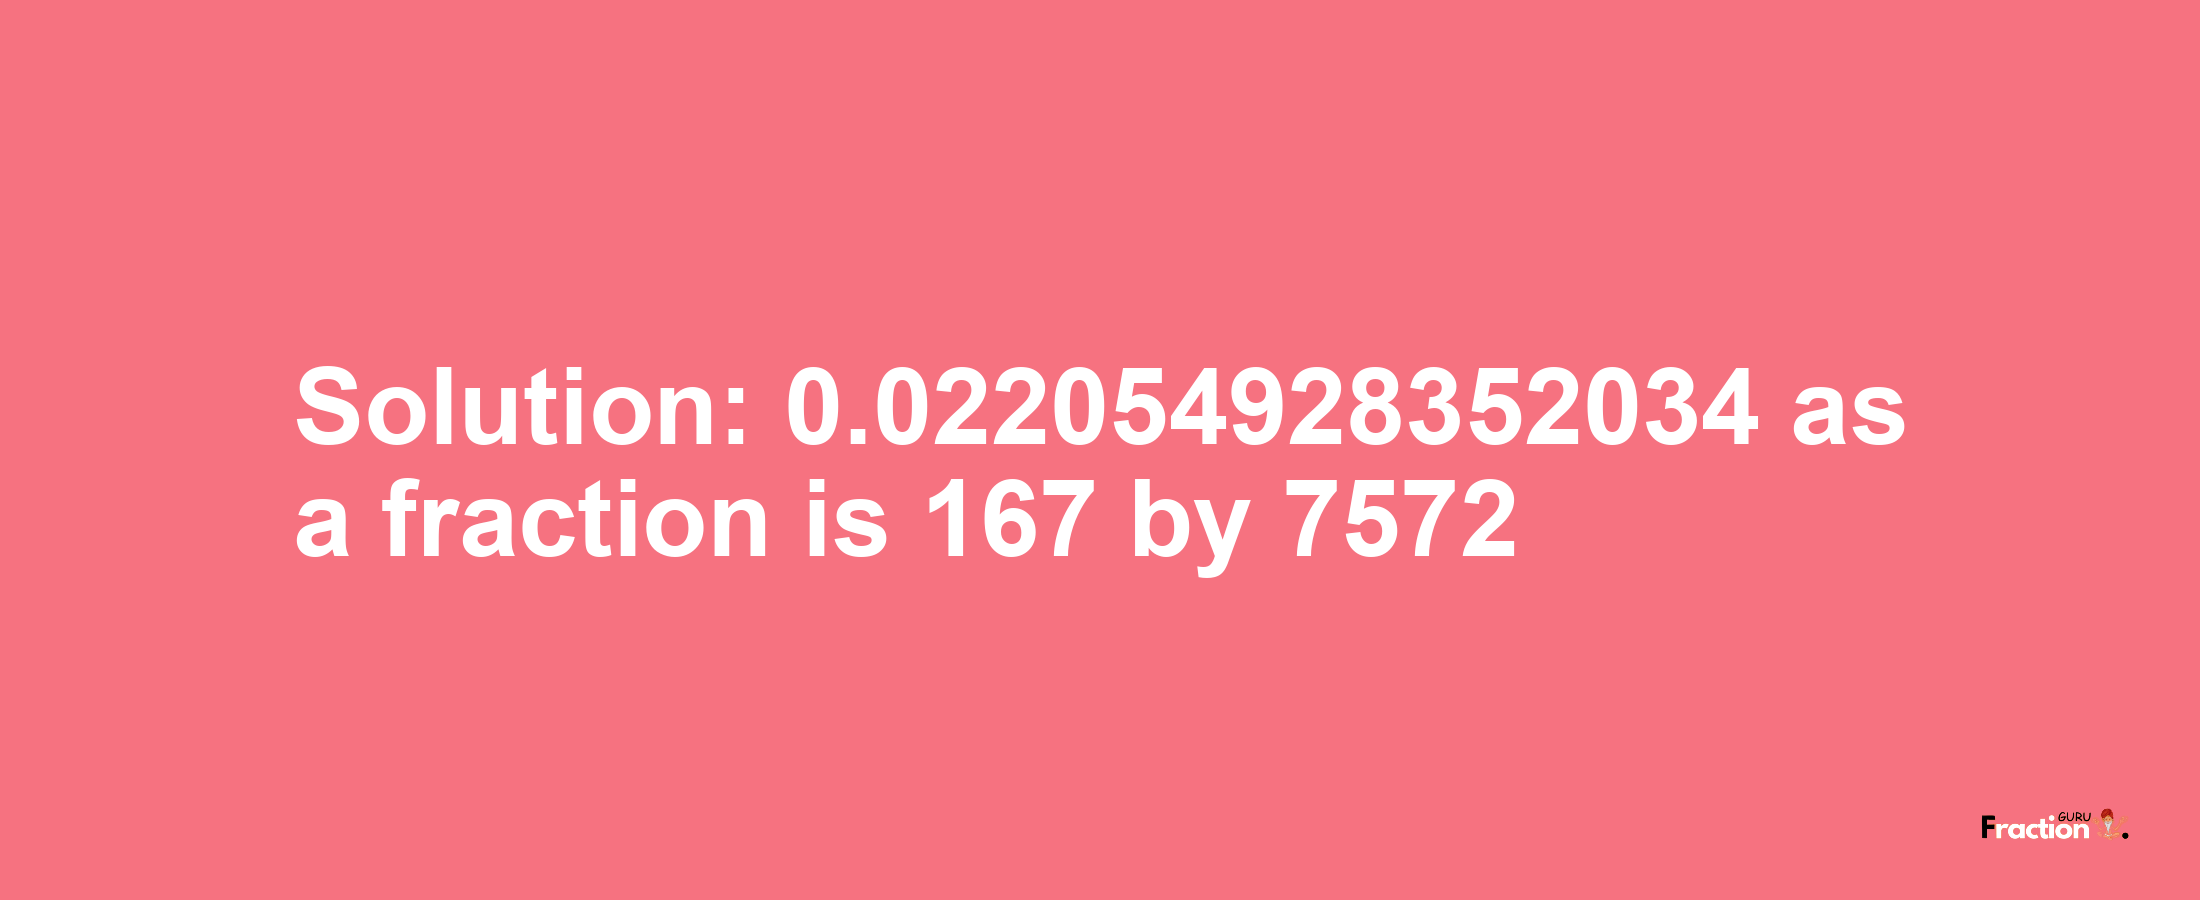 Solution:0.022054928352034 as a fraction is 167/7572